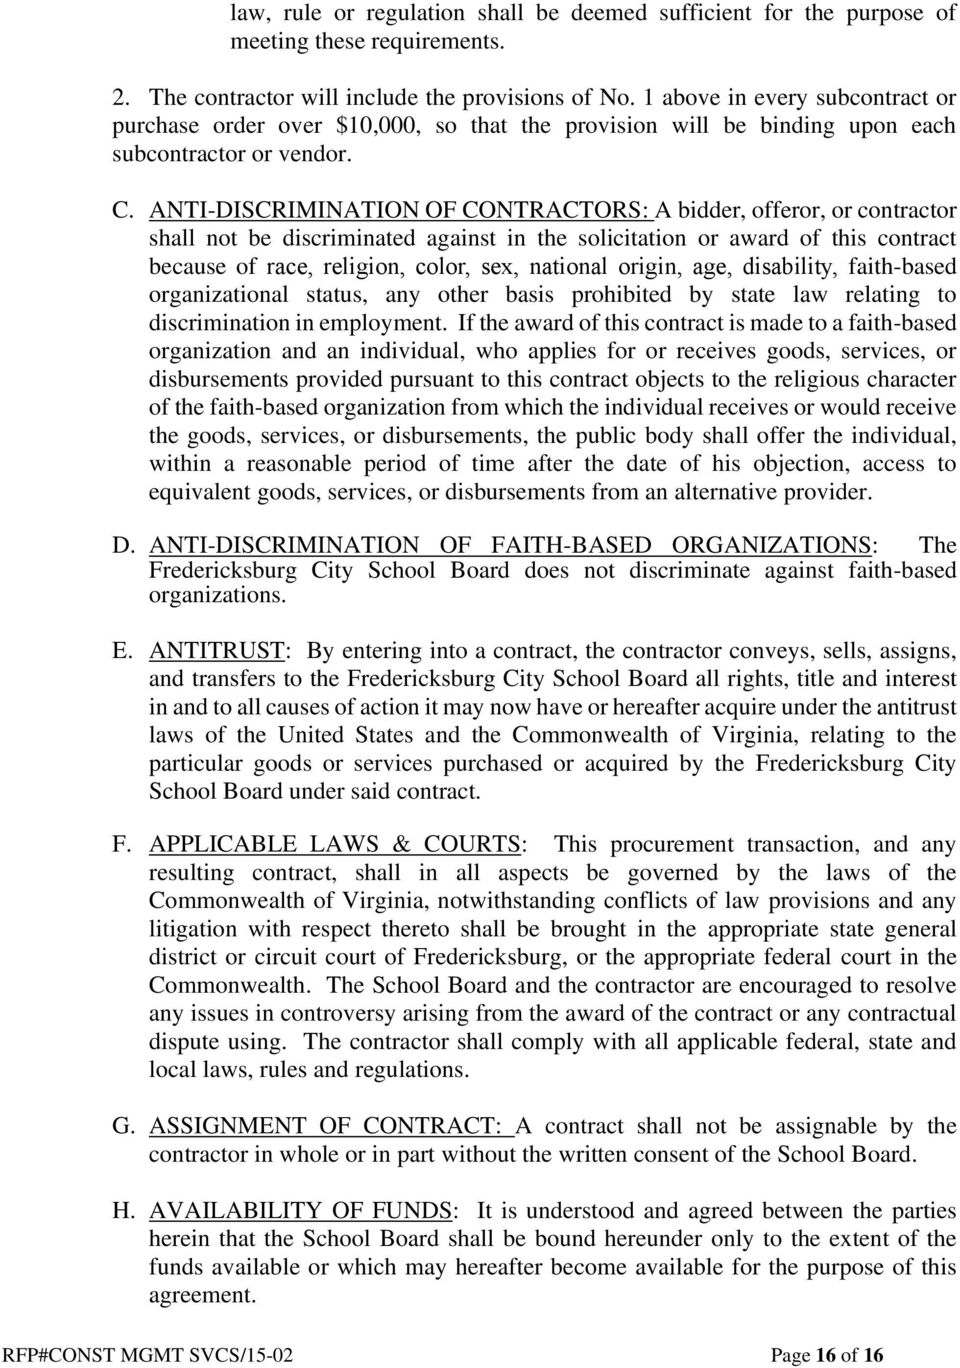 ANTI-DISCRIMINATION OF CONTRACTORS: A bidder, offeror, or contractor shall not be discriminated against in the solicitation or award of this contract because of race, religion, color, sex, national